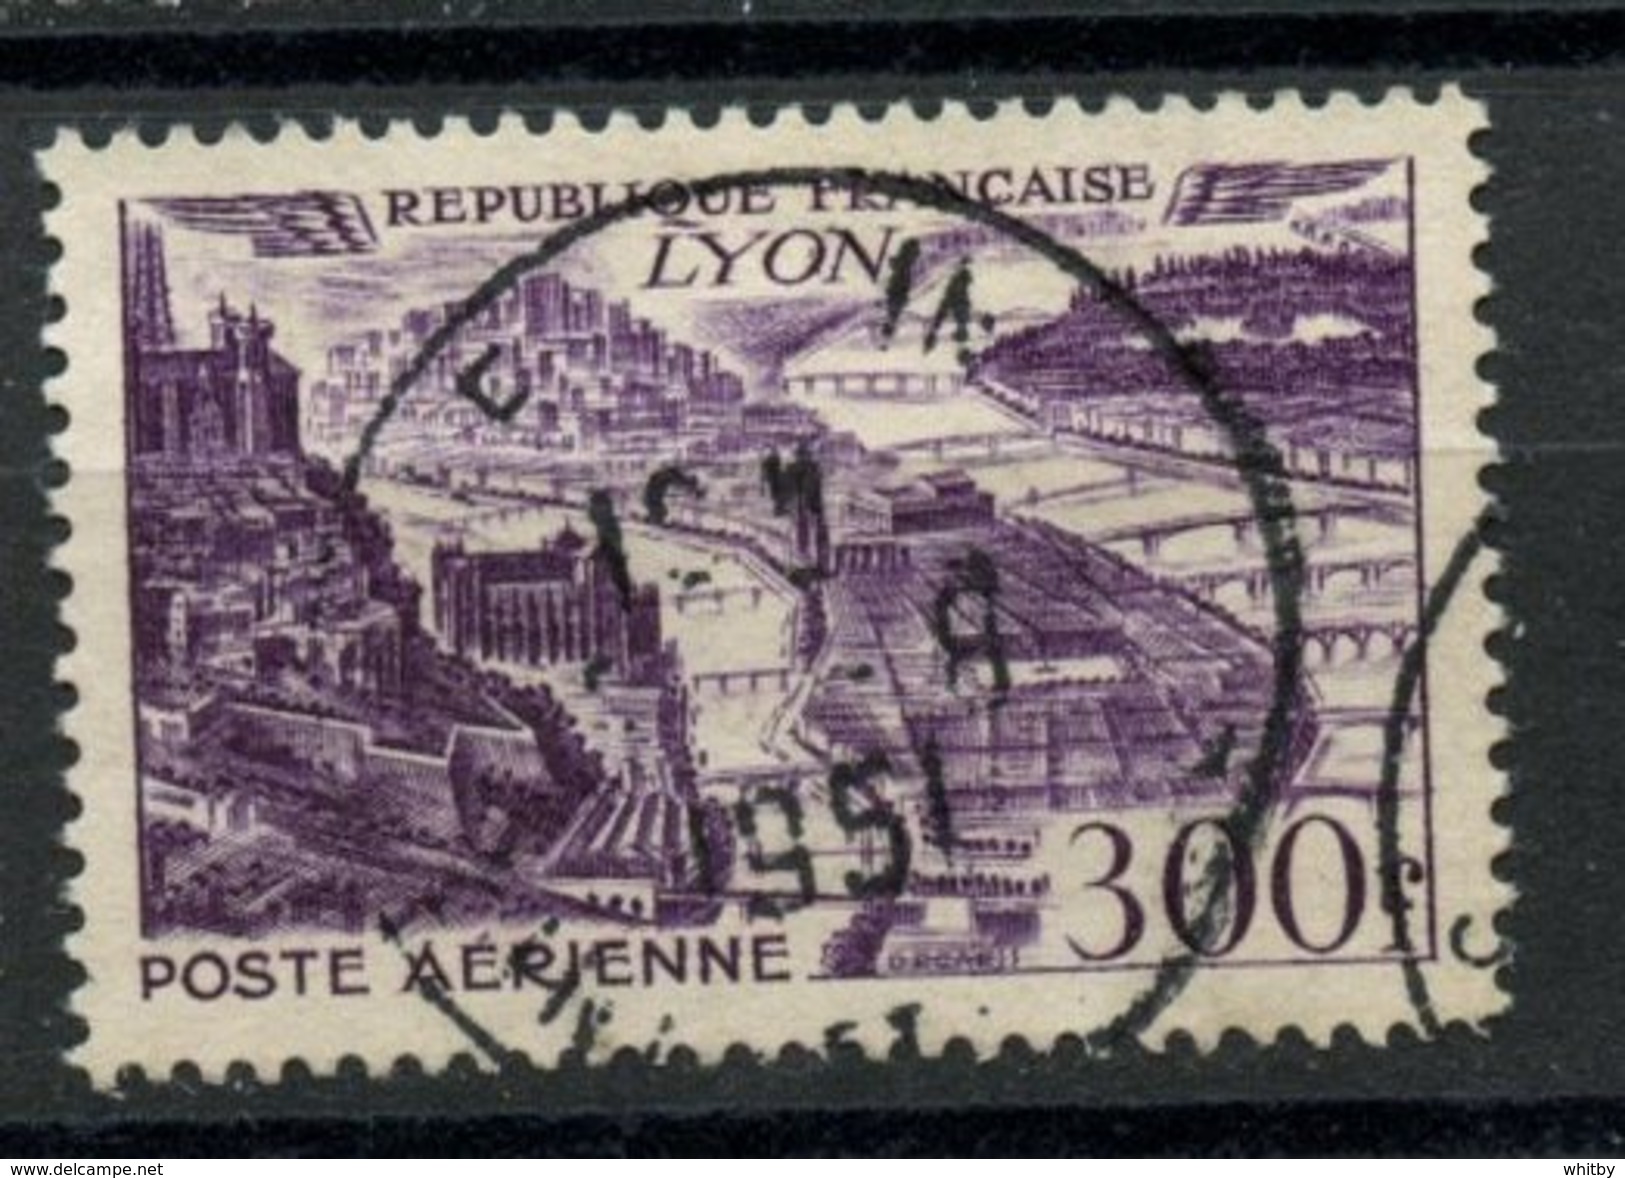 France 1949 300fr Bordeaux Issue #C25 - 1927-1959 Used